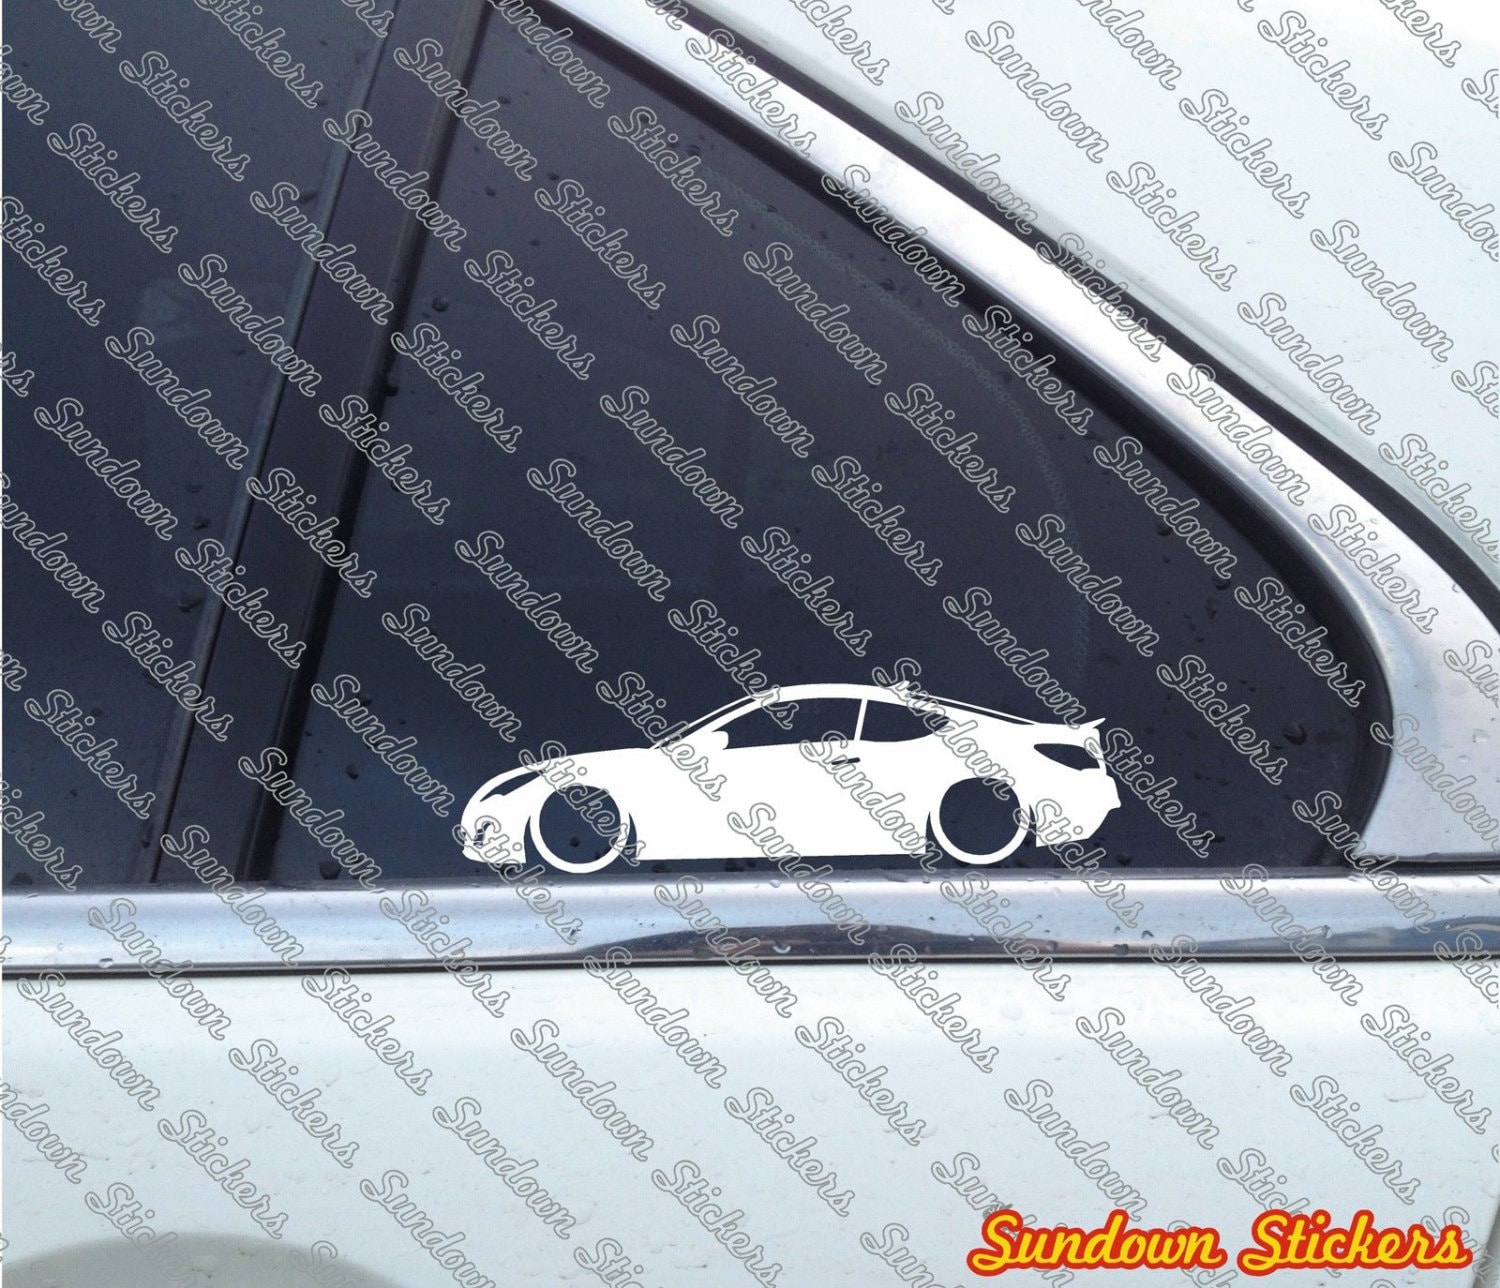 Hyundai Genesis Coupe Silhouette Sticker for Sale by in-transit